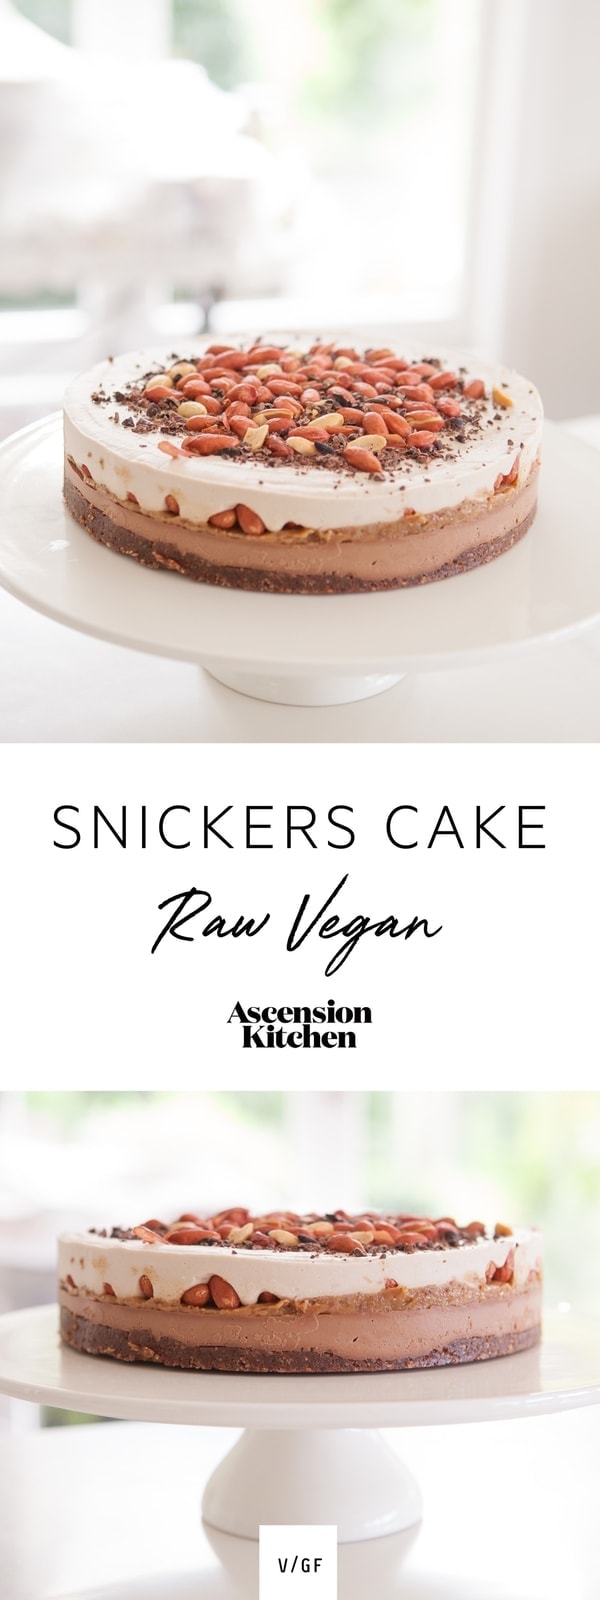 A raw, no-bake Snickers Cake – entirely vegan and gluten free. Total over the top indulgence – but hey – you live once! ~ snickers cake recipe, snickers ice cream cake ~  #AscensionKitchen  // Pin to your own inspiration board! //